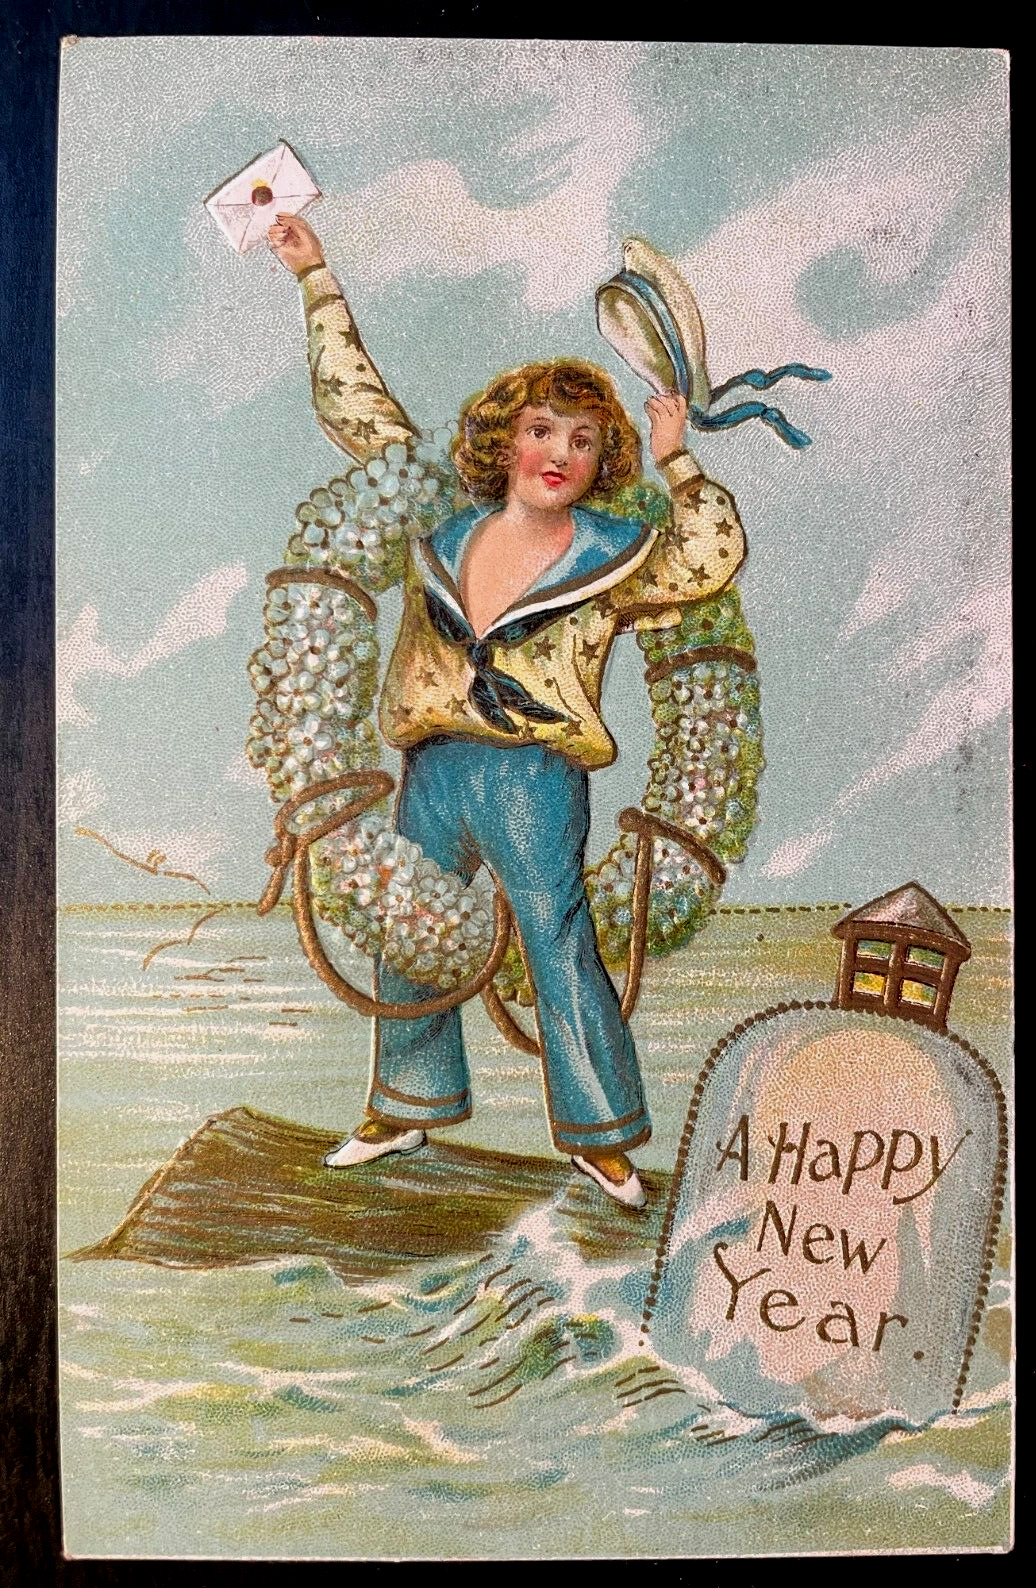 Vintage Victorian Postcard 1901-1910 A Happy New Year - Sailor Boy with Flowers